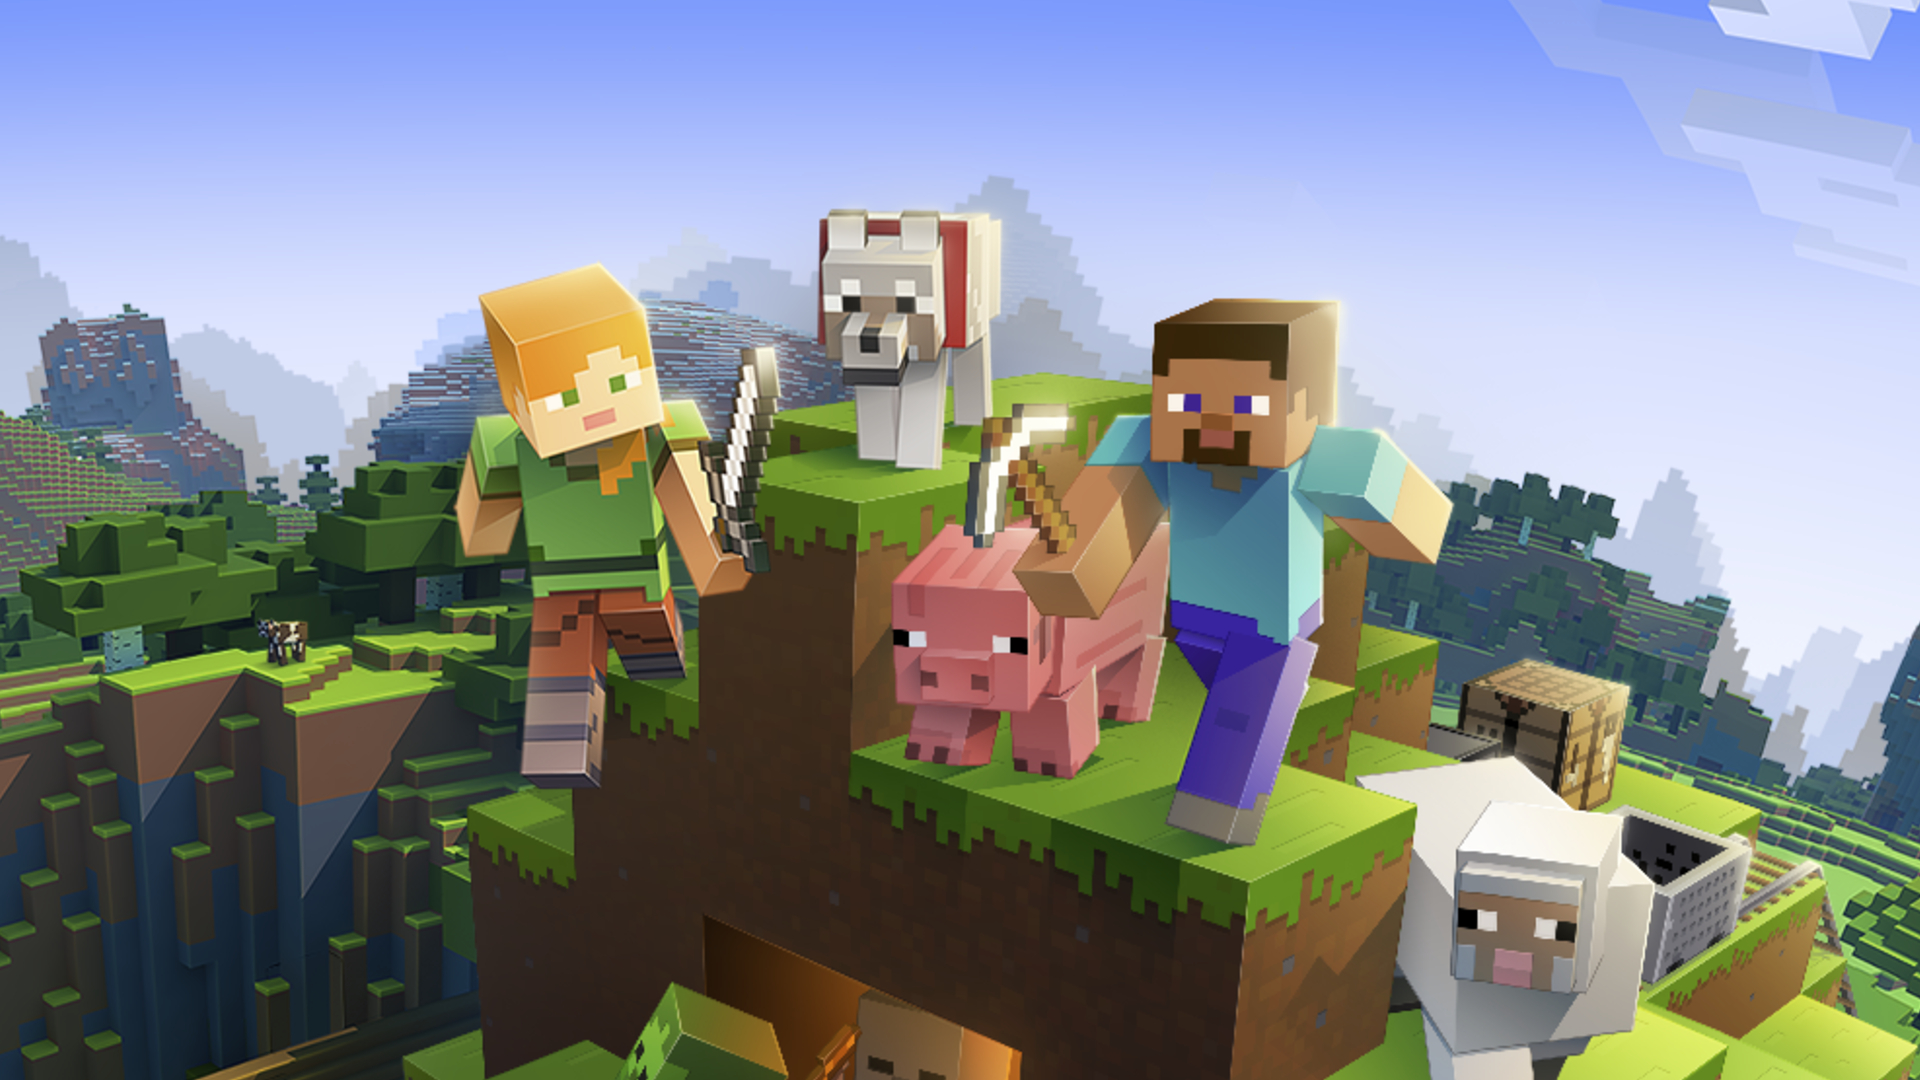  Minecraft is now an R-rated game in South Korea 